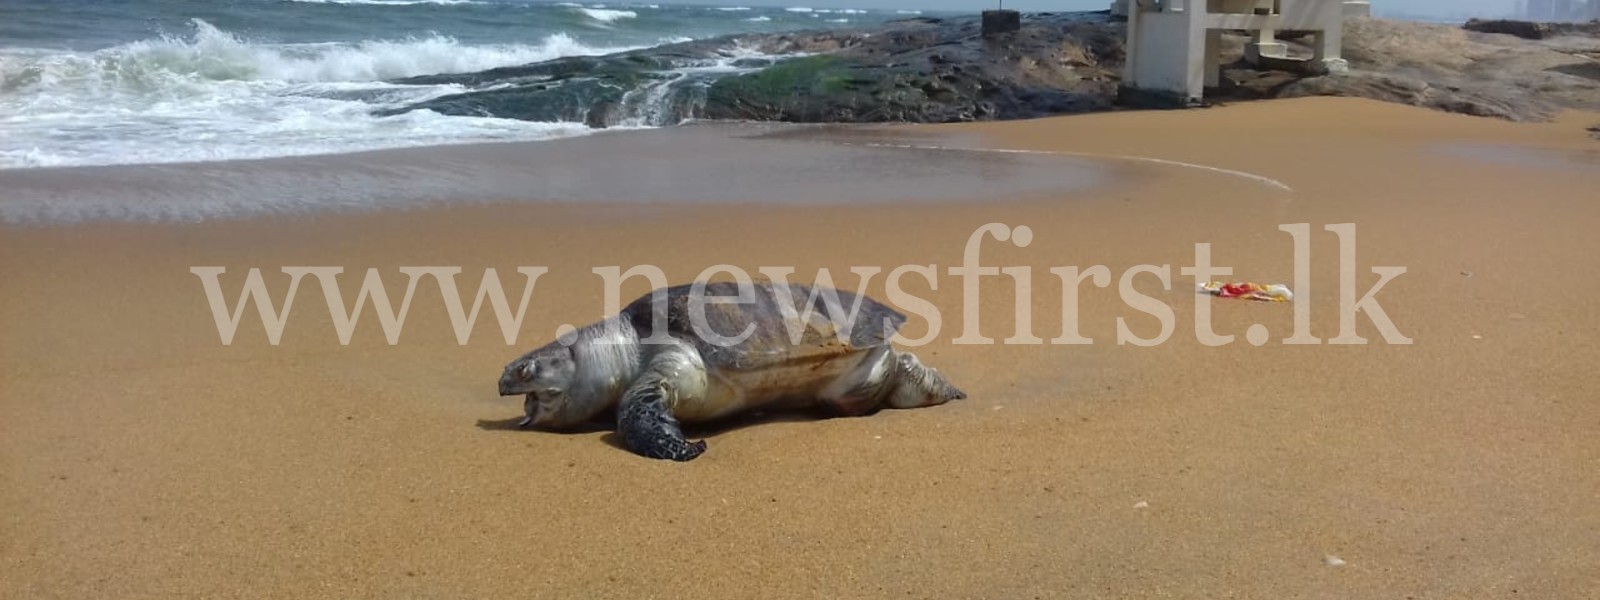 17 dead Sea Turtles & 03 Dolphins washed ashore so far